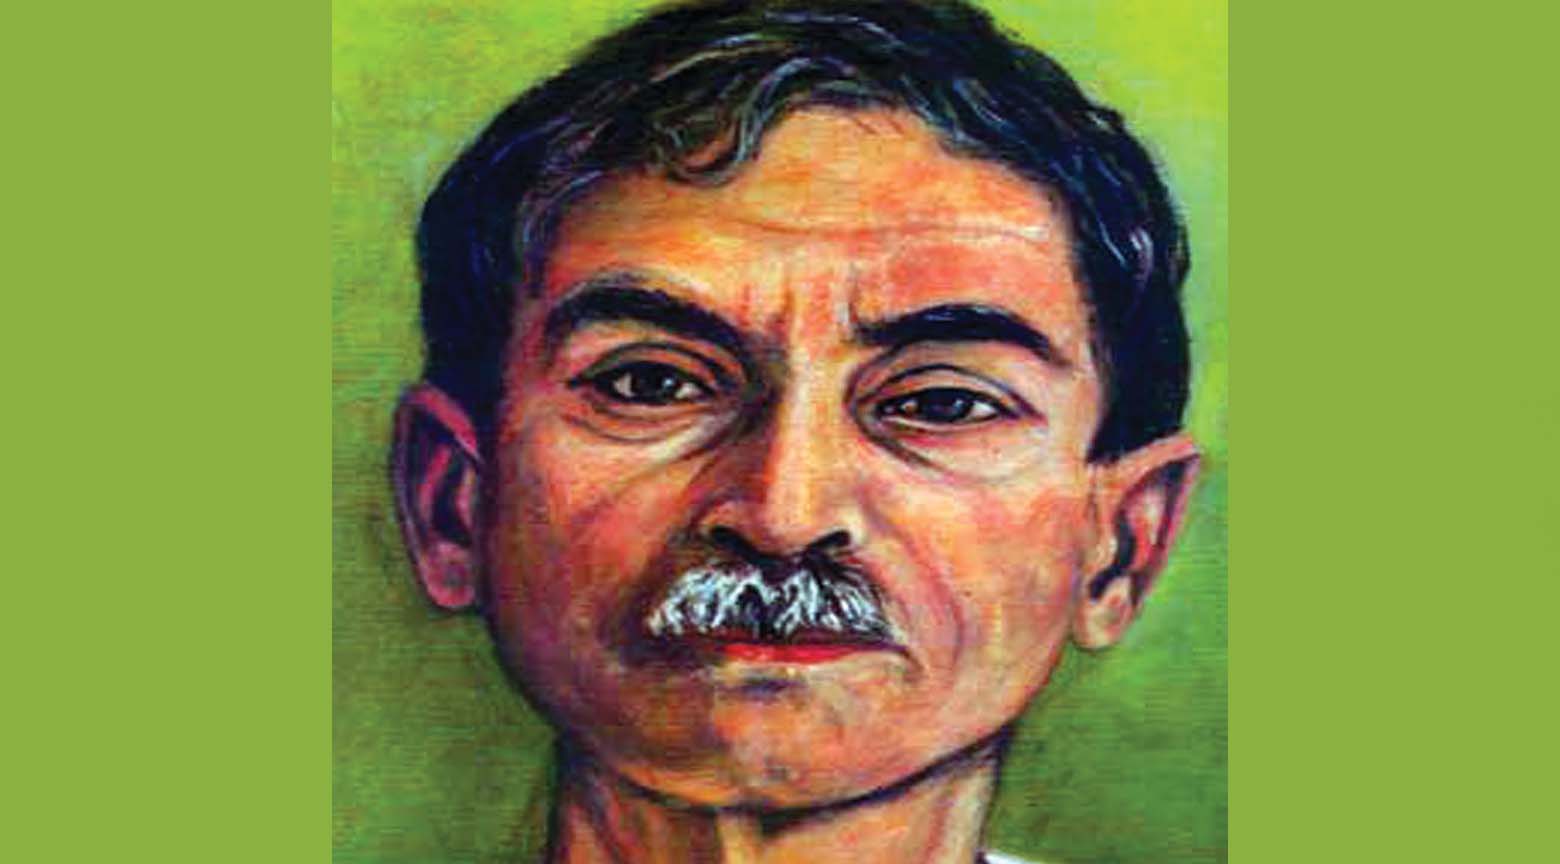 Munshi Premchand Quote: “Good looks can stand anything but insult.”